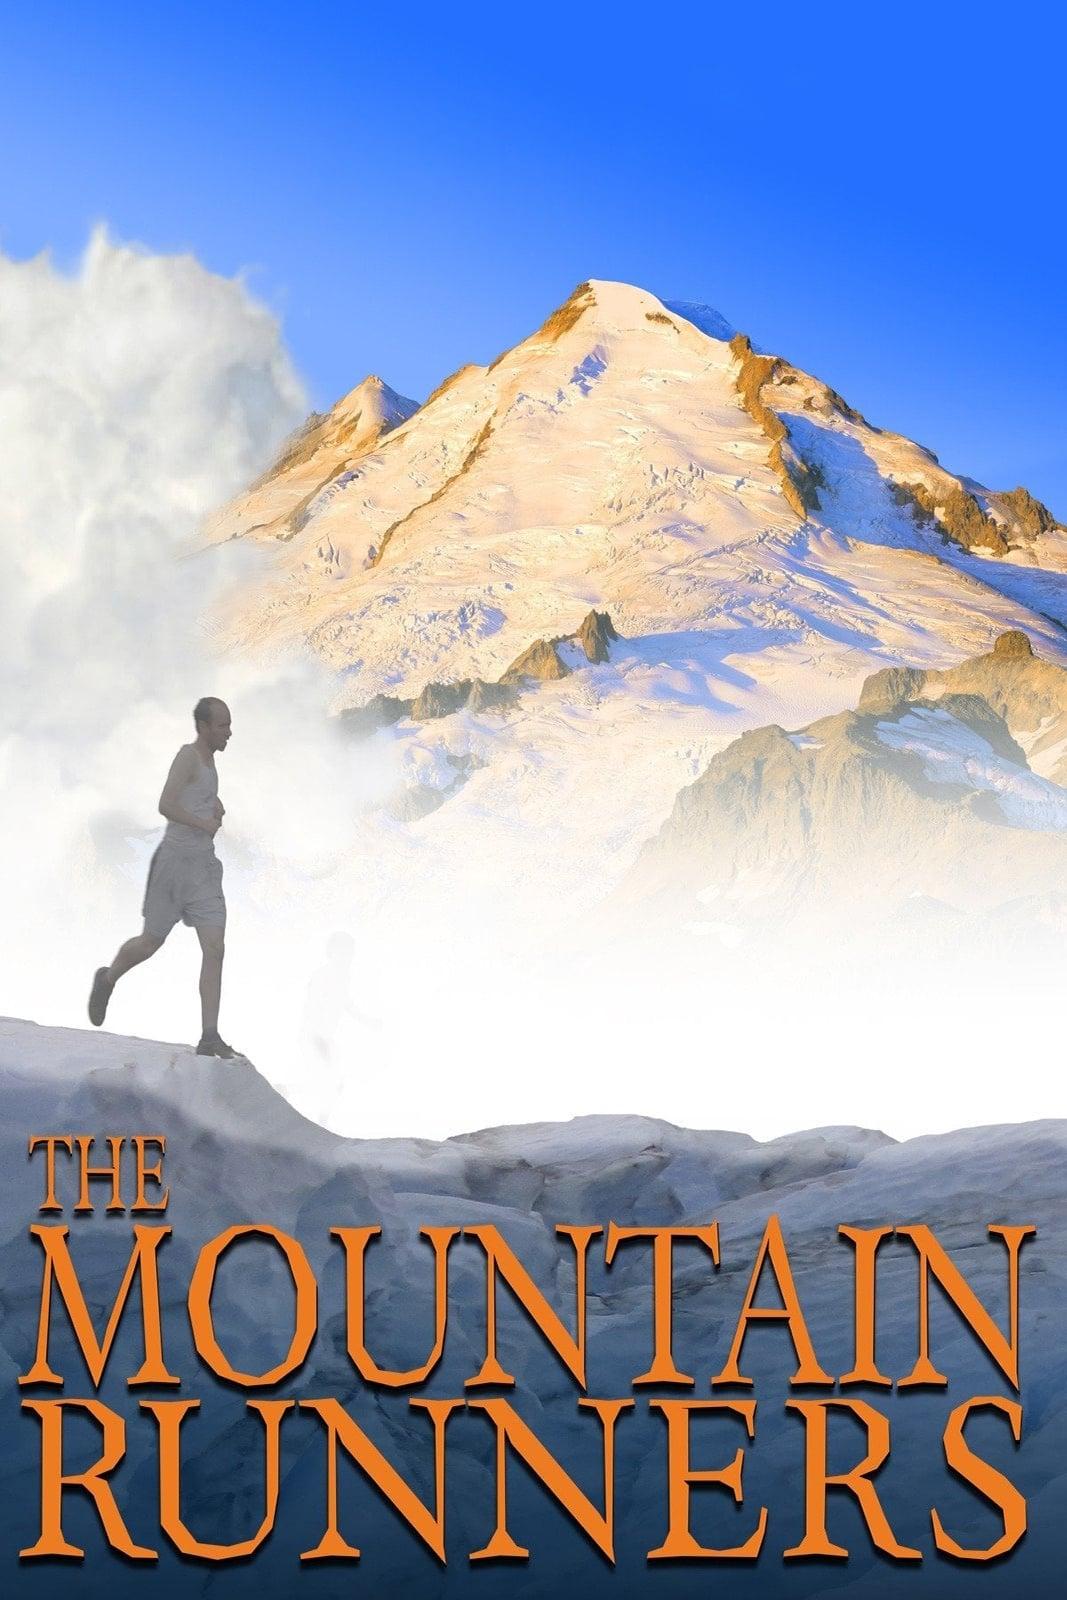 The Mountain Runners poster